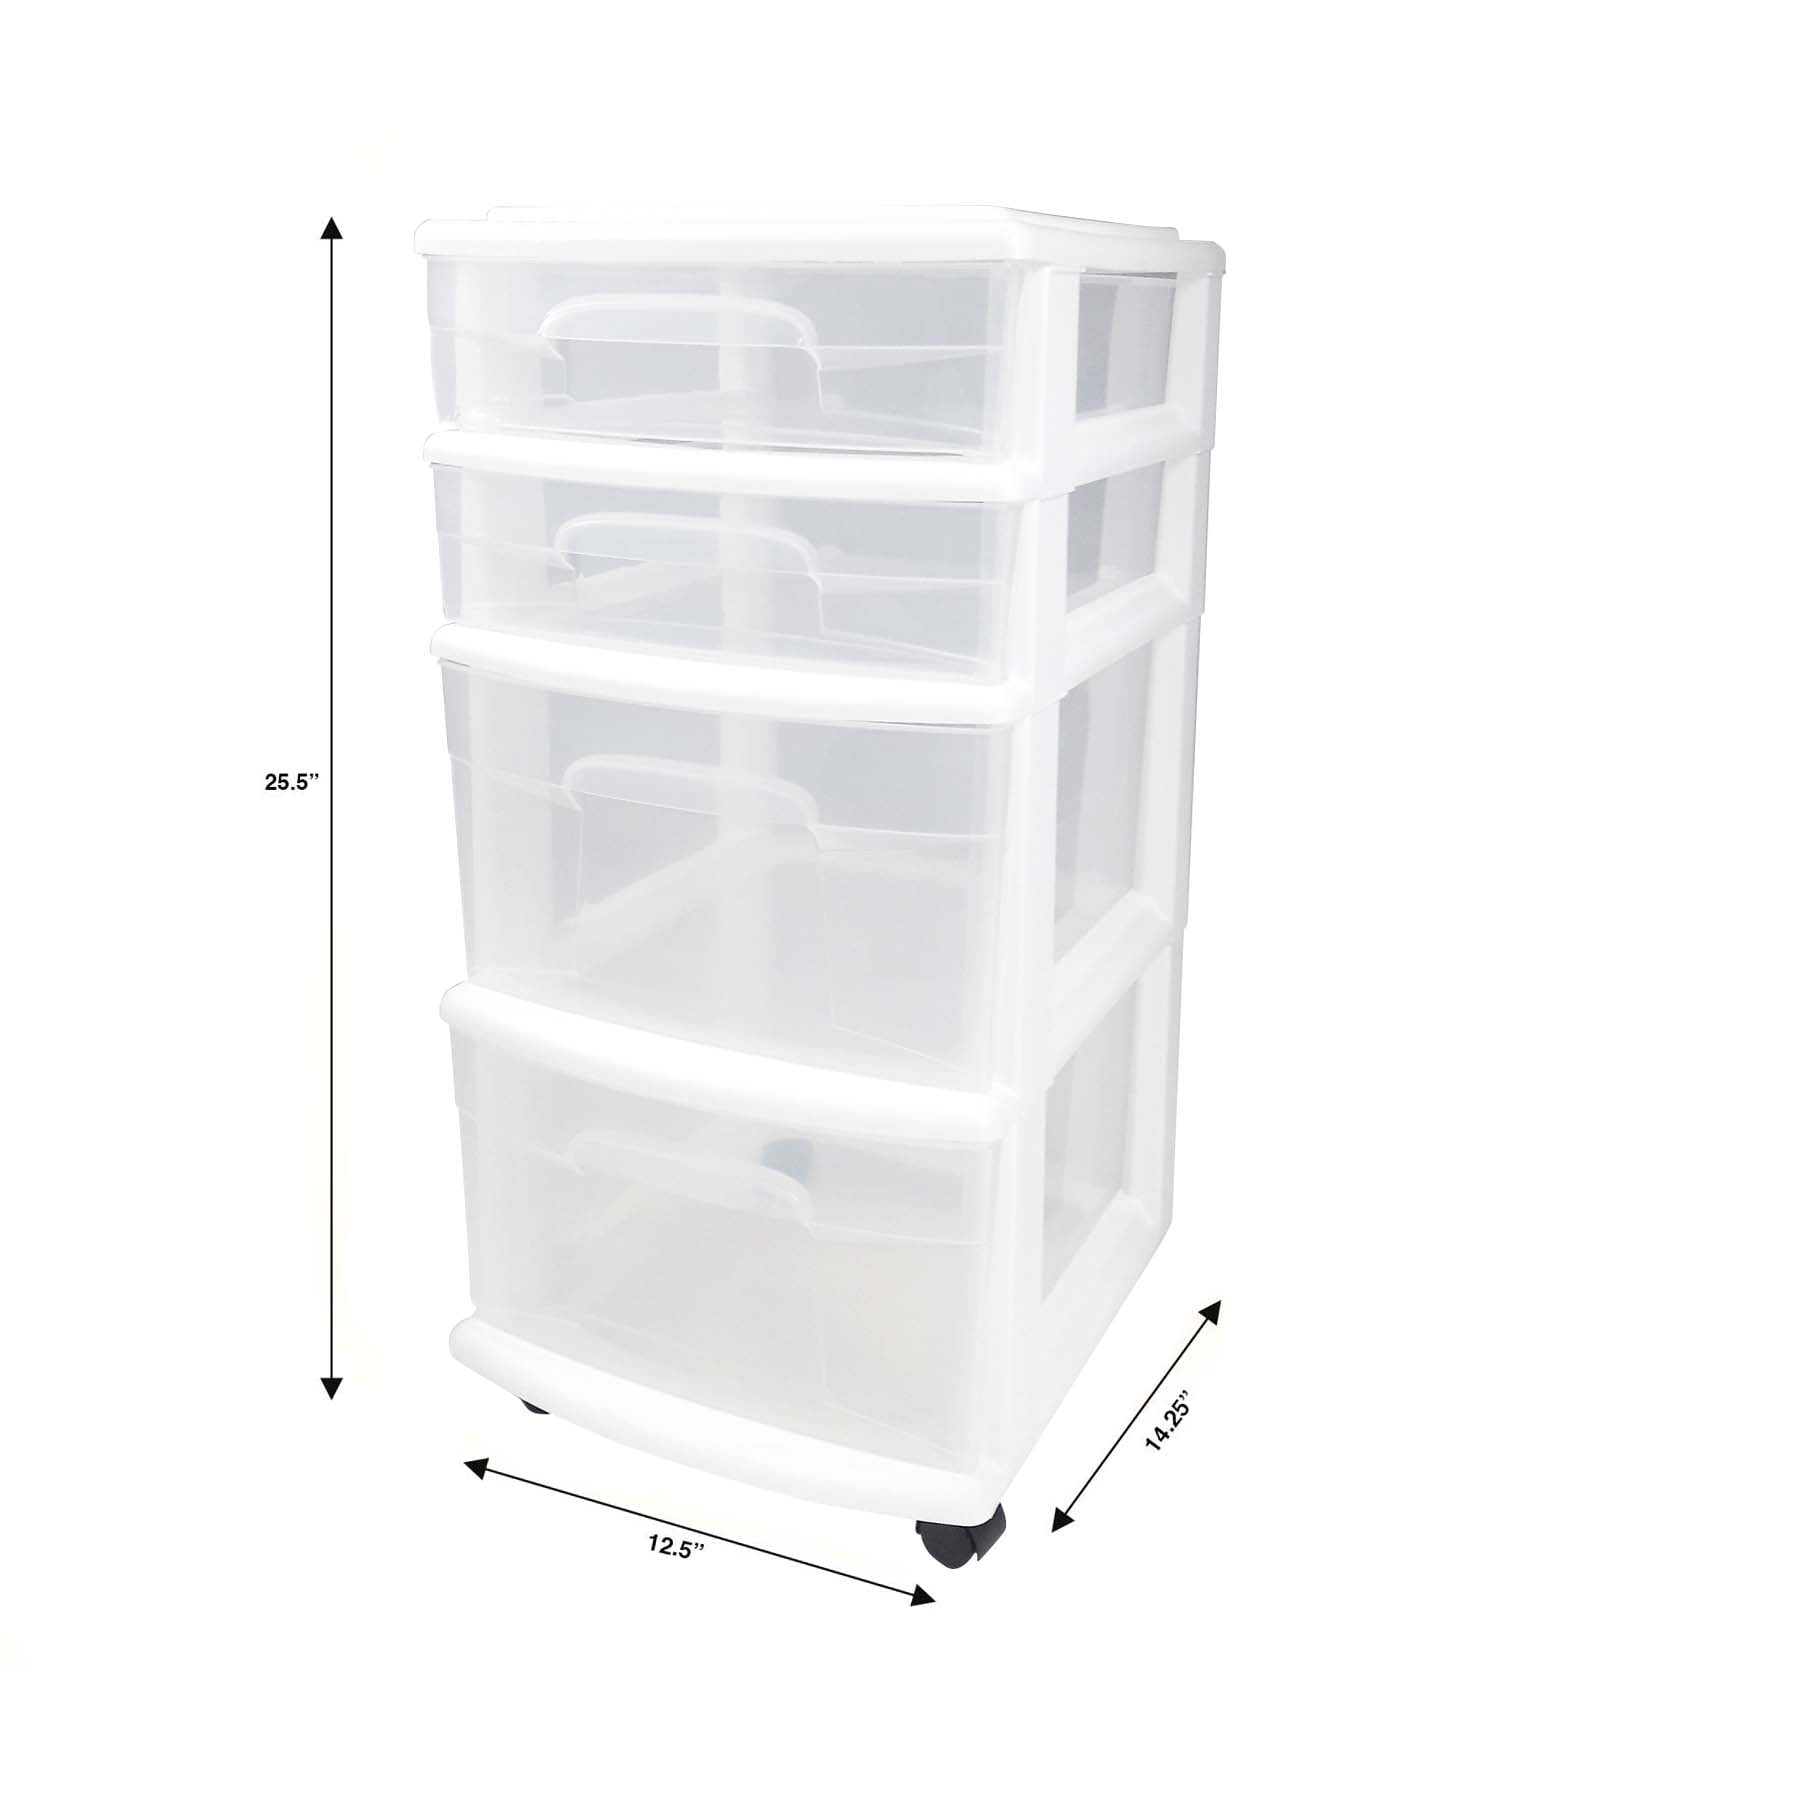 Homz 4 Medium Drawer Cart, White with Clear Drawers, with Wheels, Set of 1